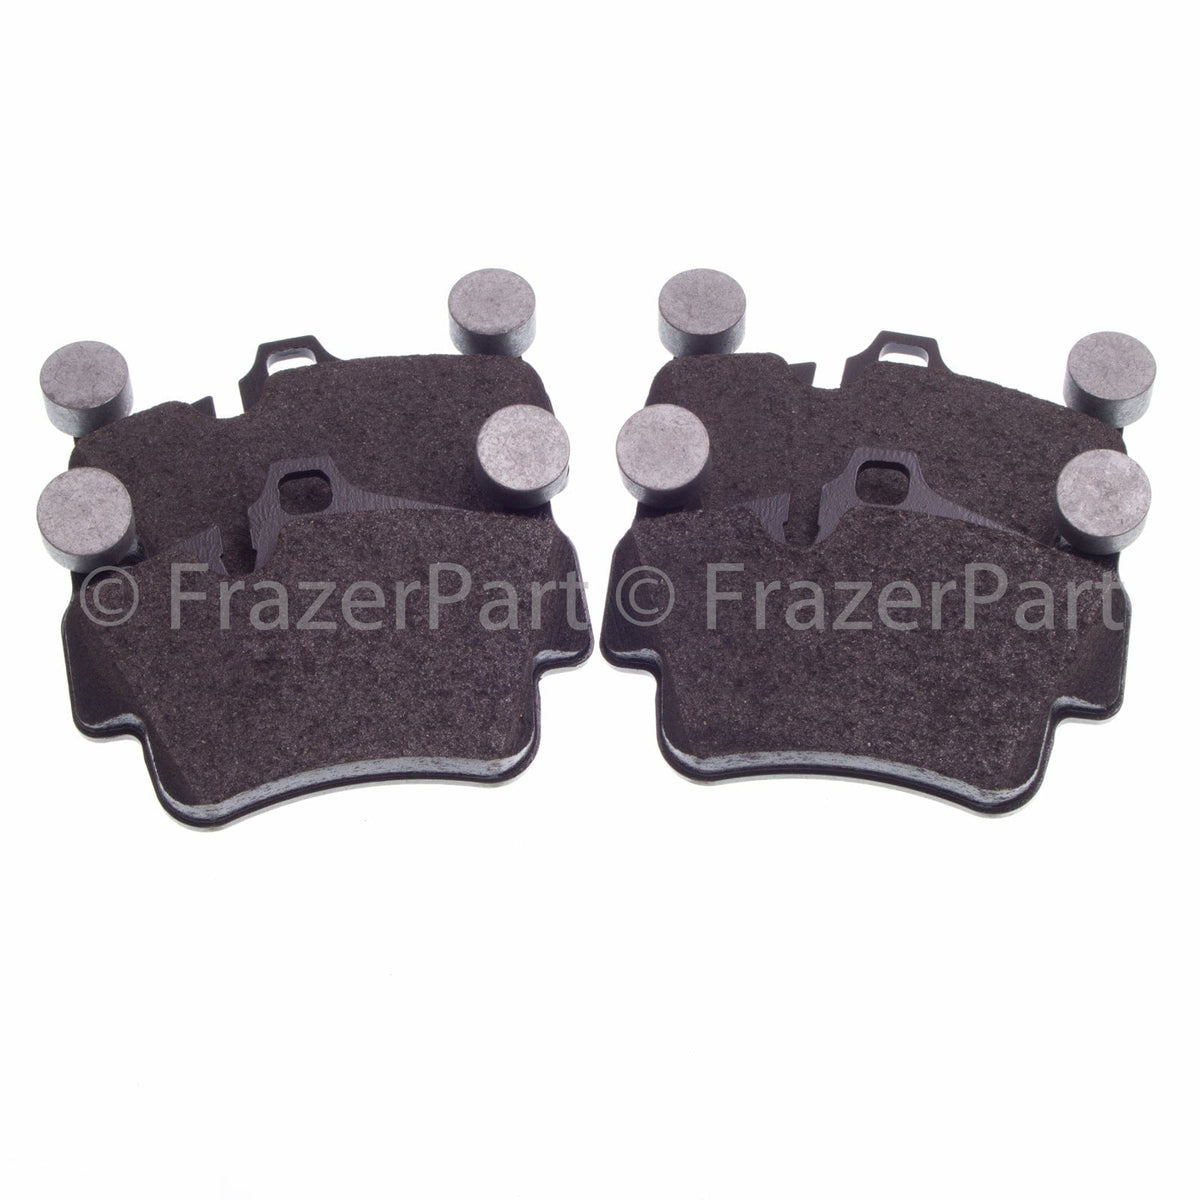 987 Boxster S, Cayman S & 997 C2/C4 OEM front brake pads